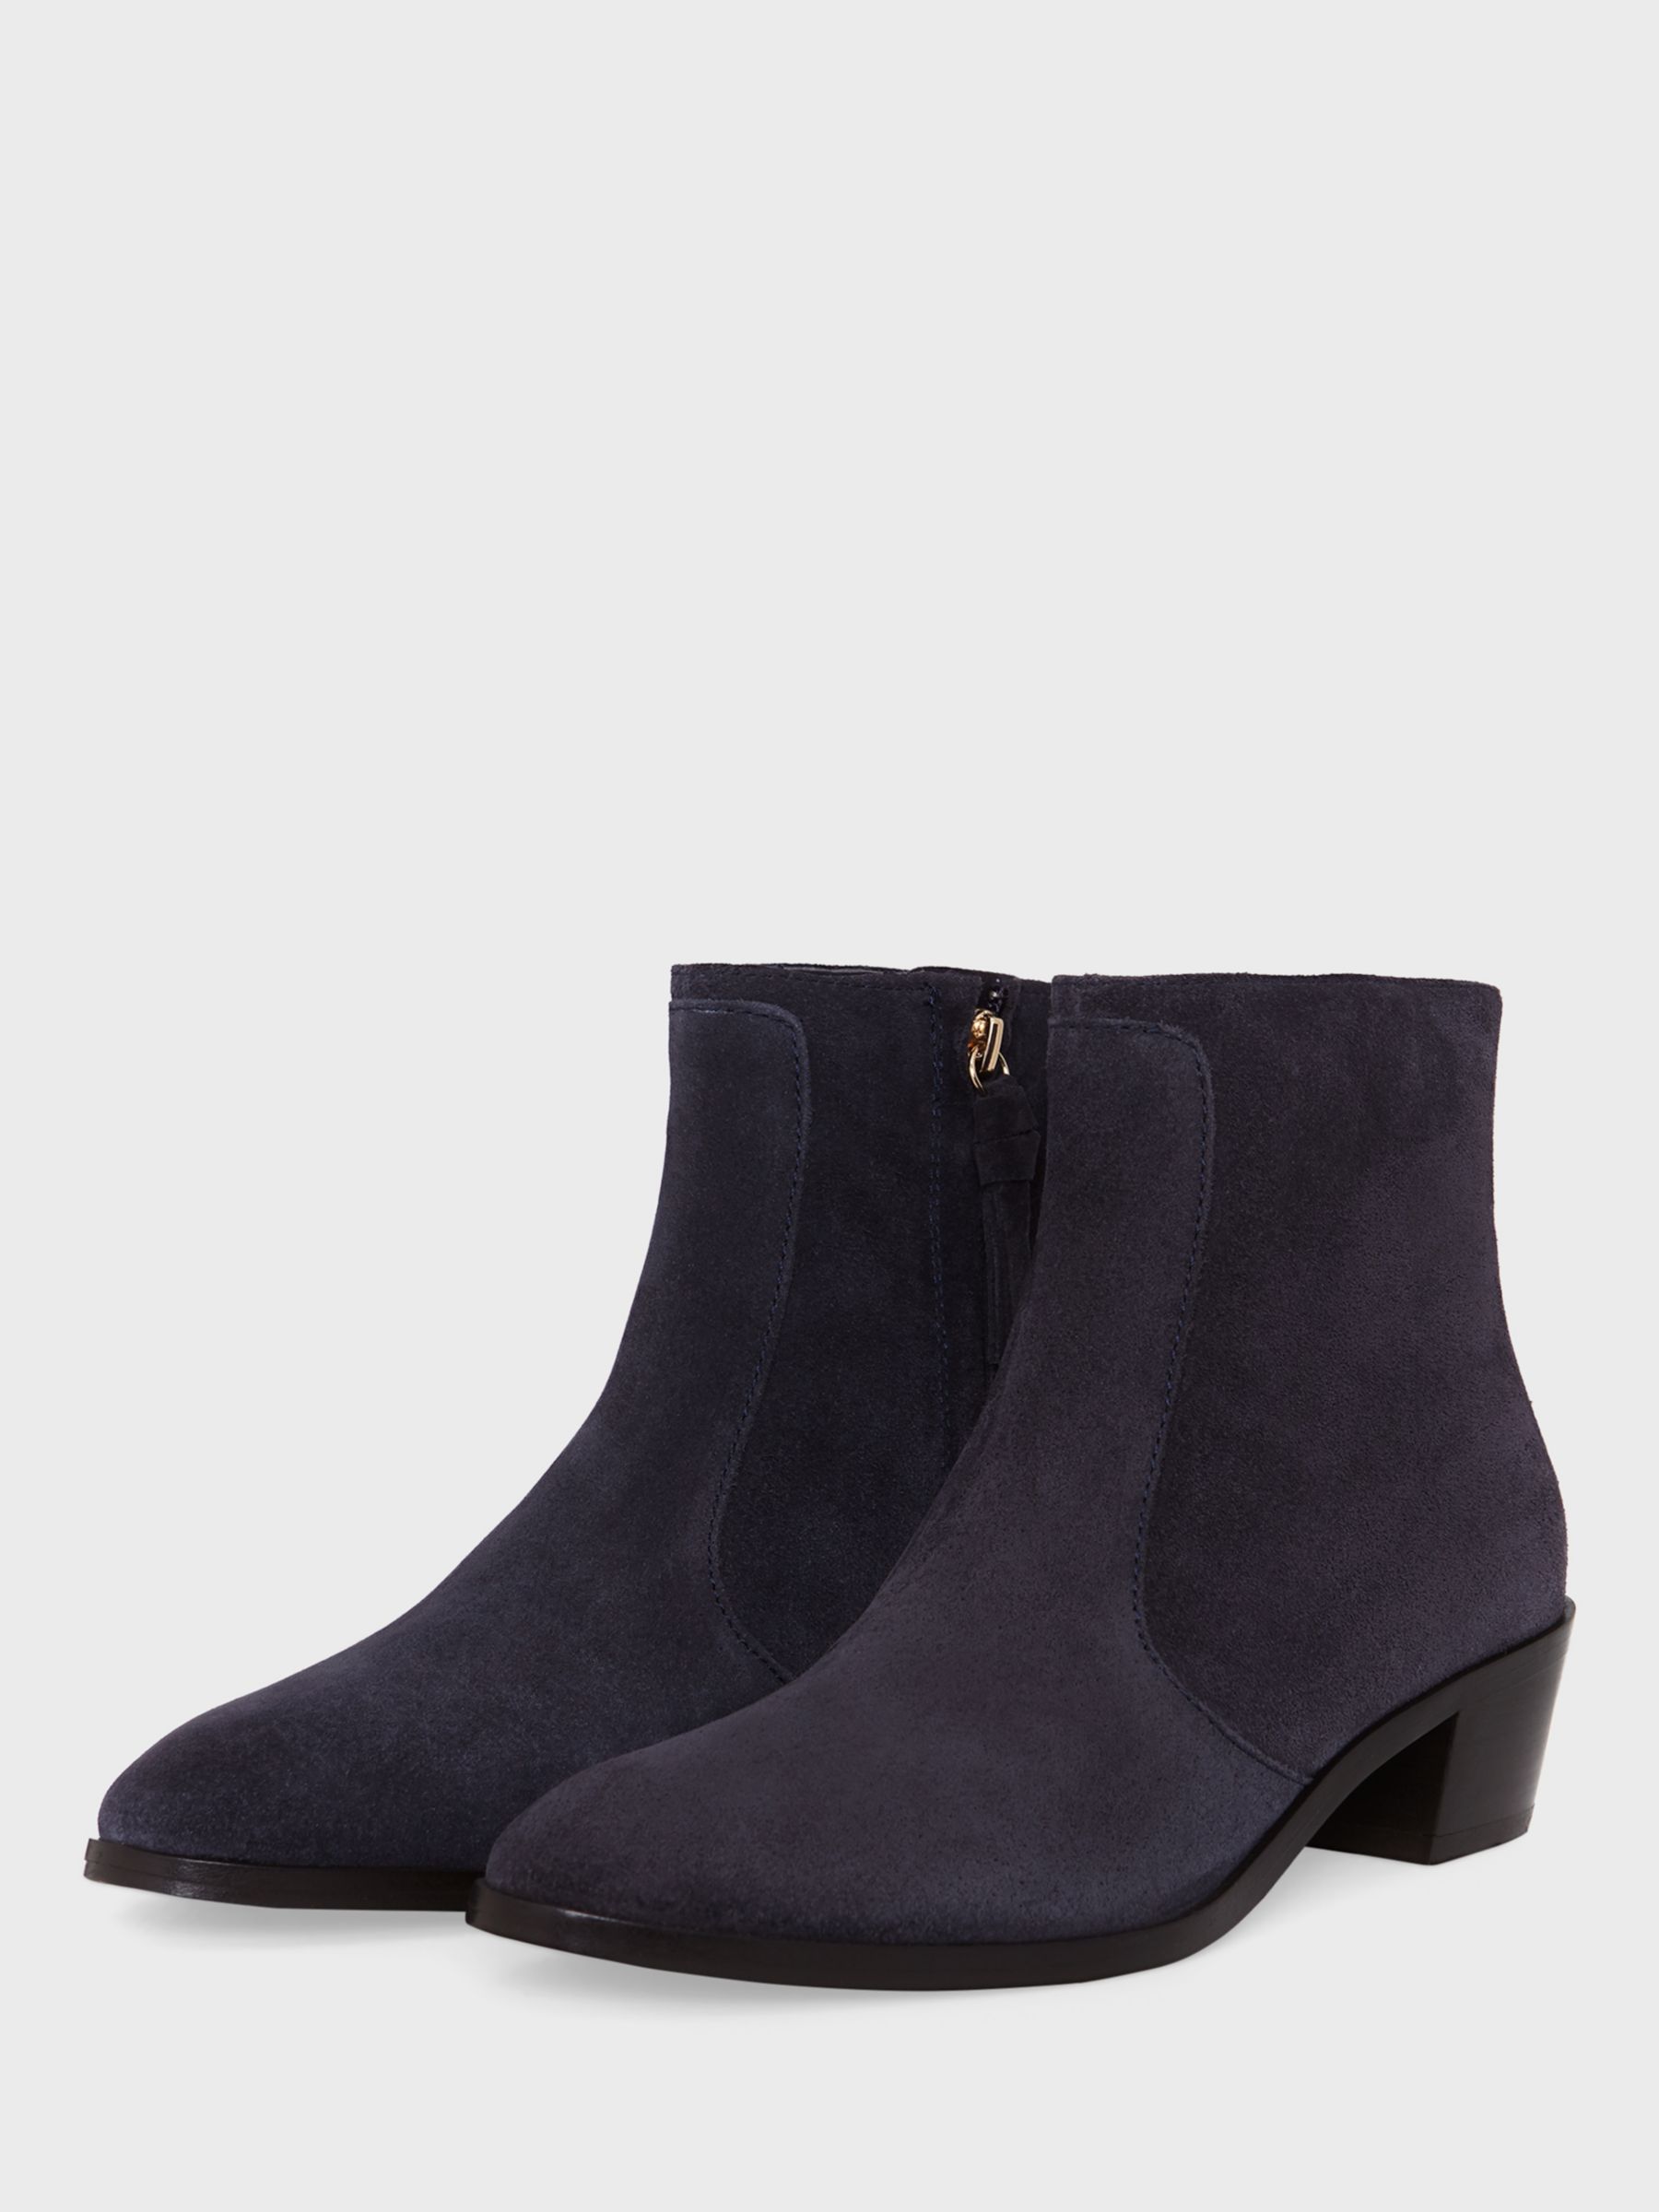 Hobbs Shona Suede Ankle Boots, Navy at John Lewis & Partners